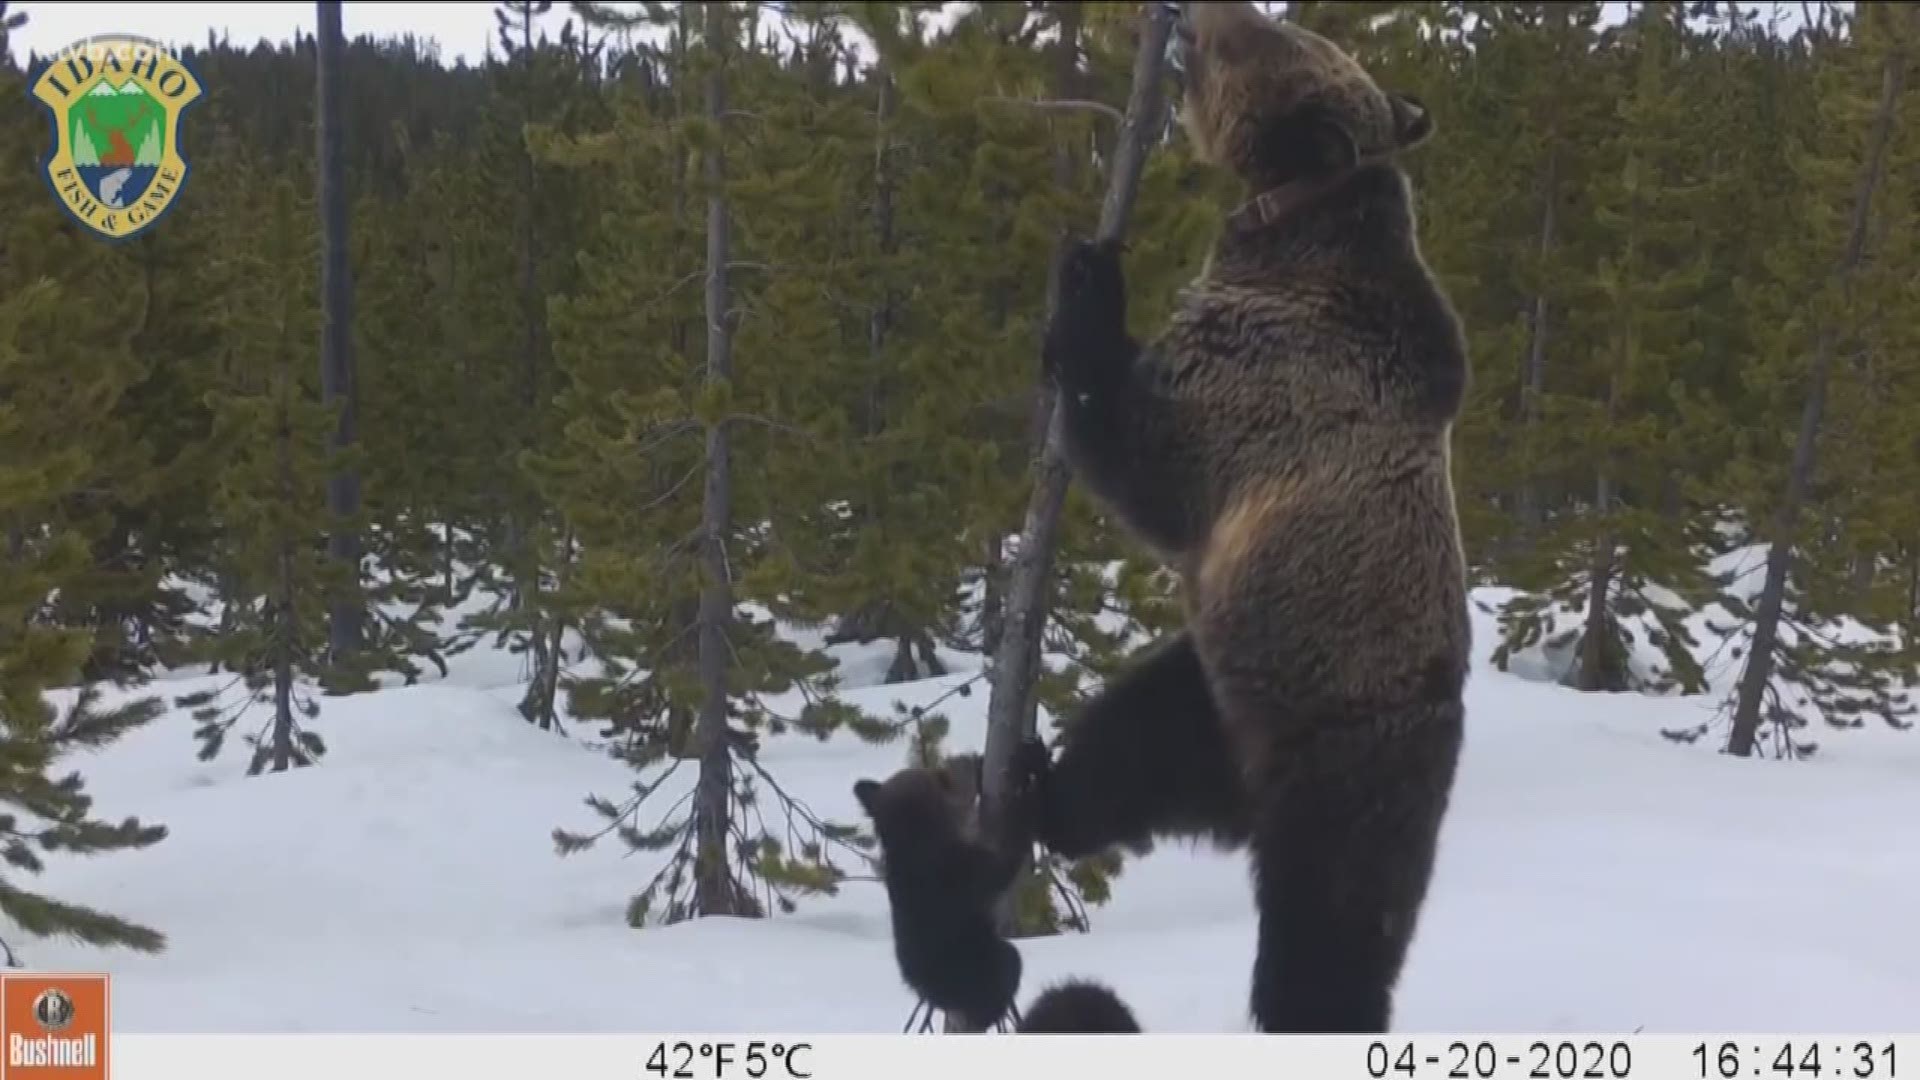 Cameras operated by the Idaho Department of Fish and Game caught a grizzly bear and her cubs foraging in the Island Park area of eastern Idaho.